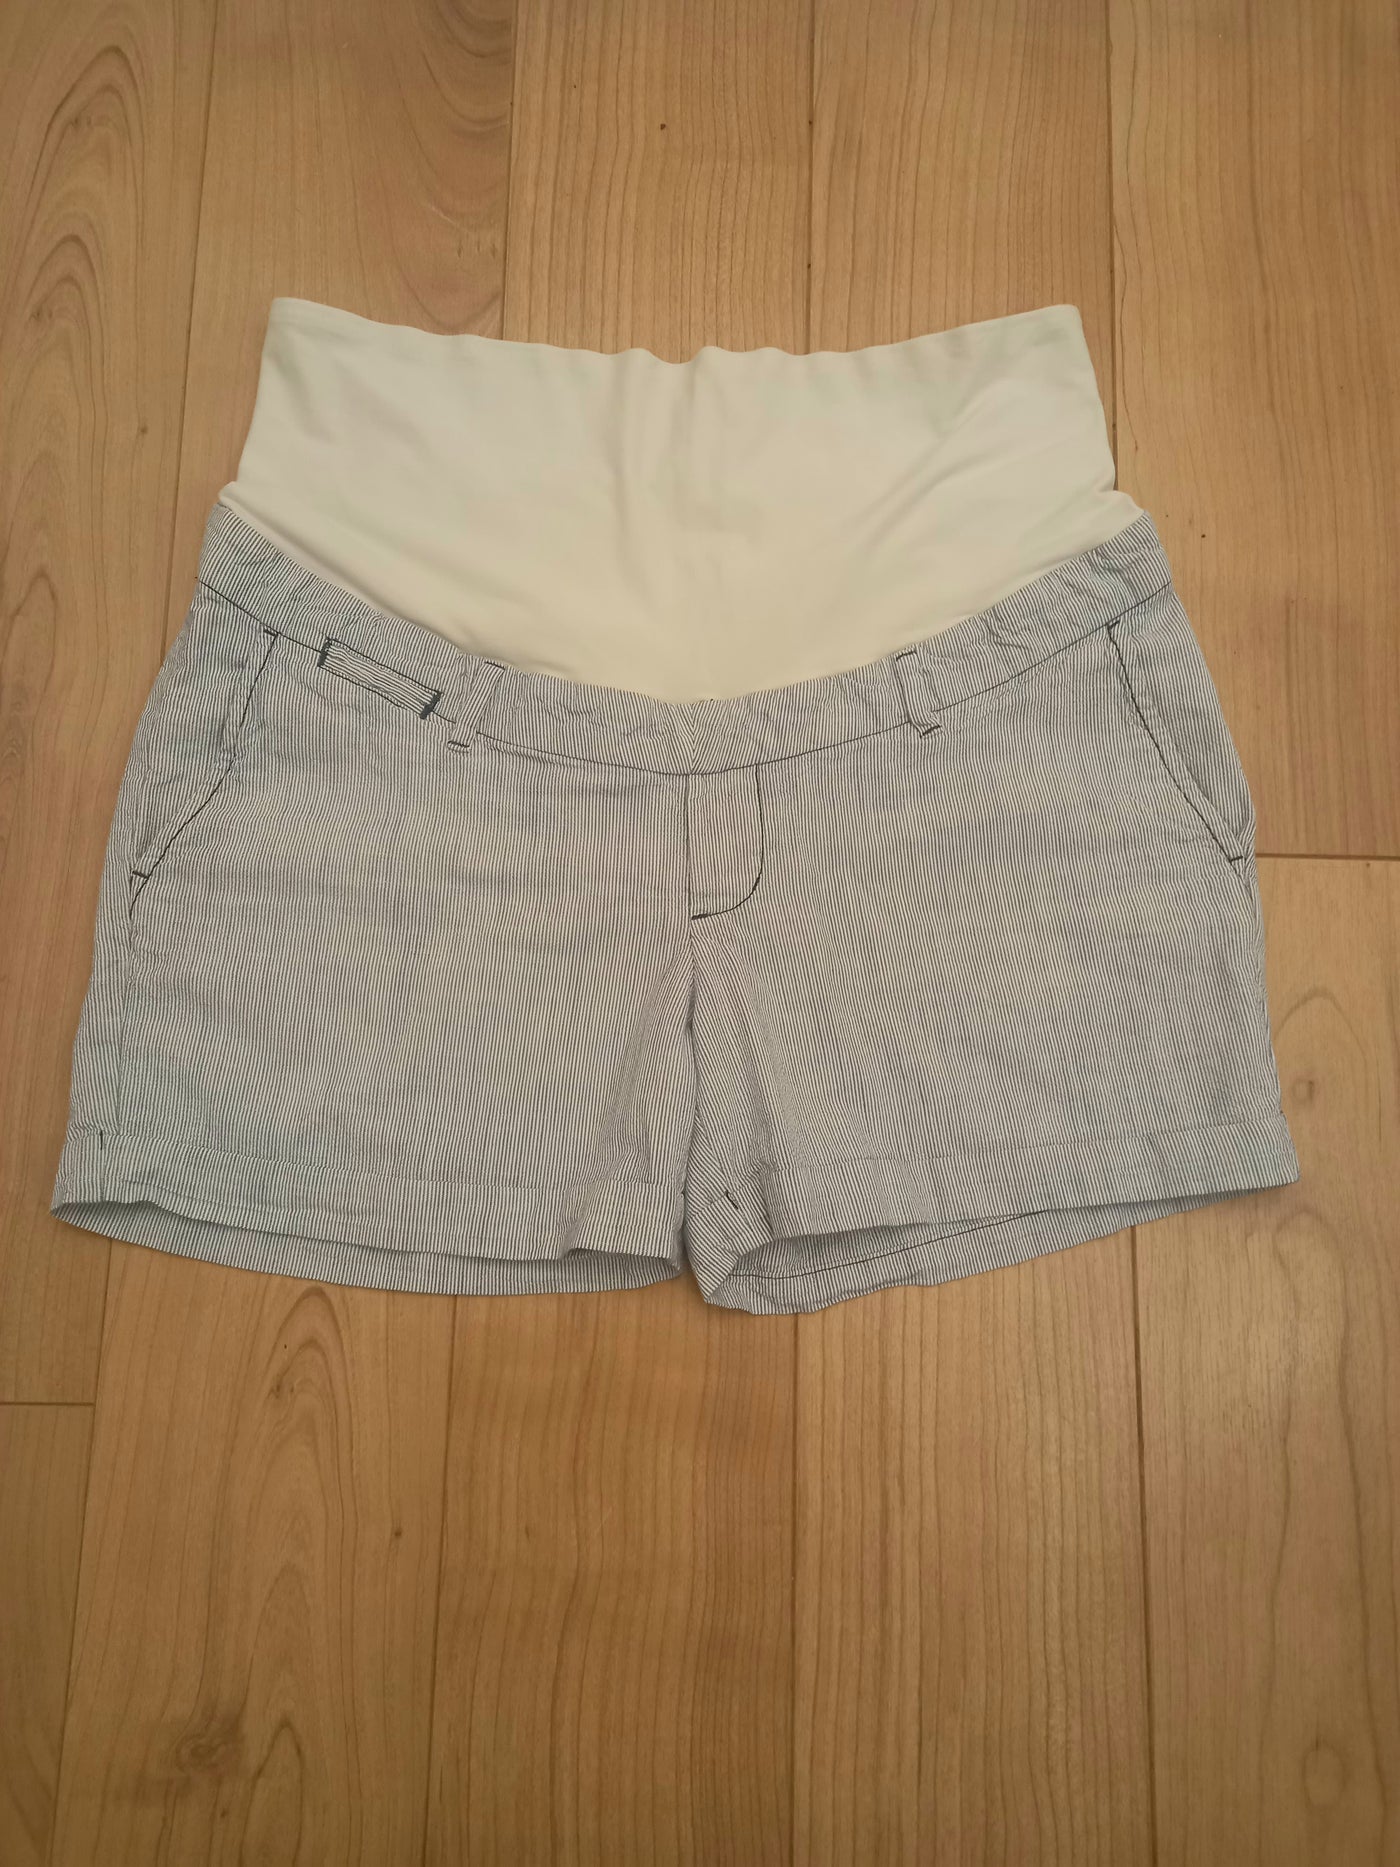 H&M Mama blue & white striped overbump shorts - Size EUR 46 (Approx UK 16)